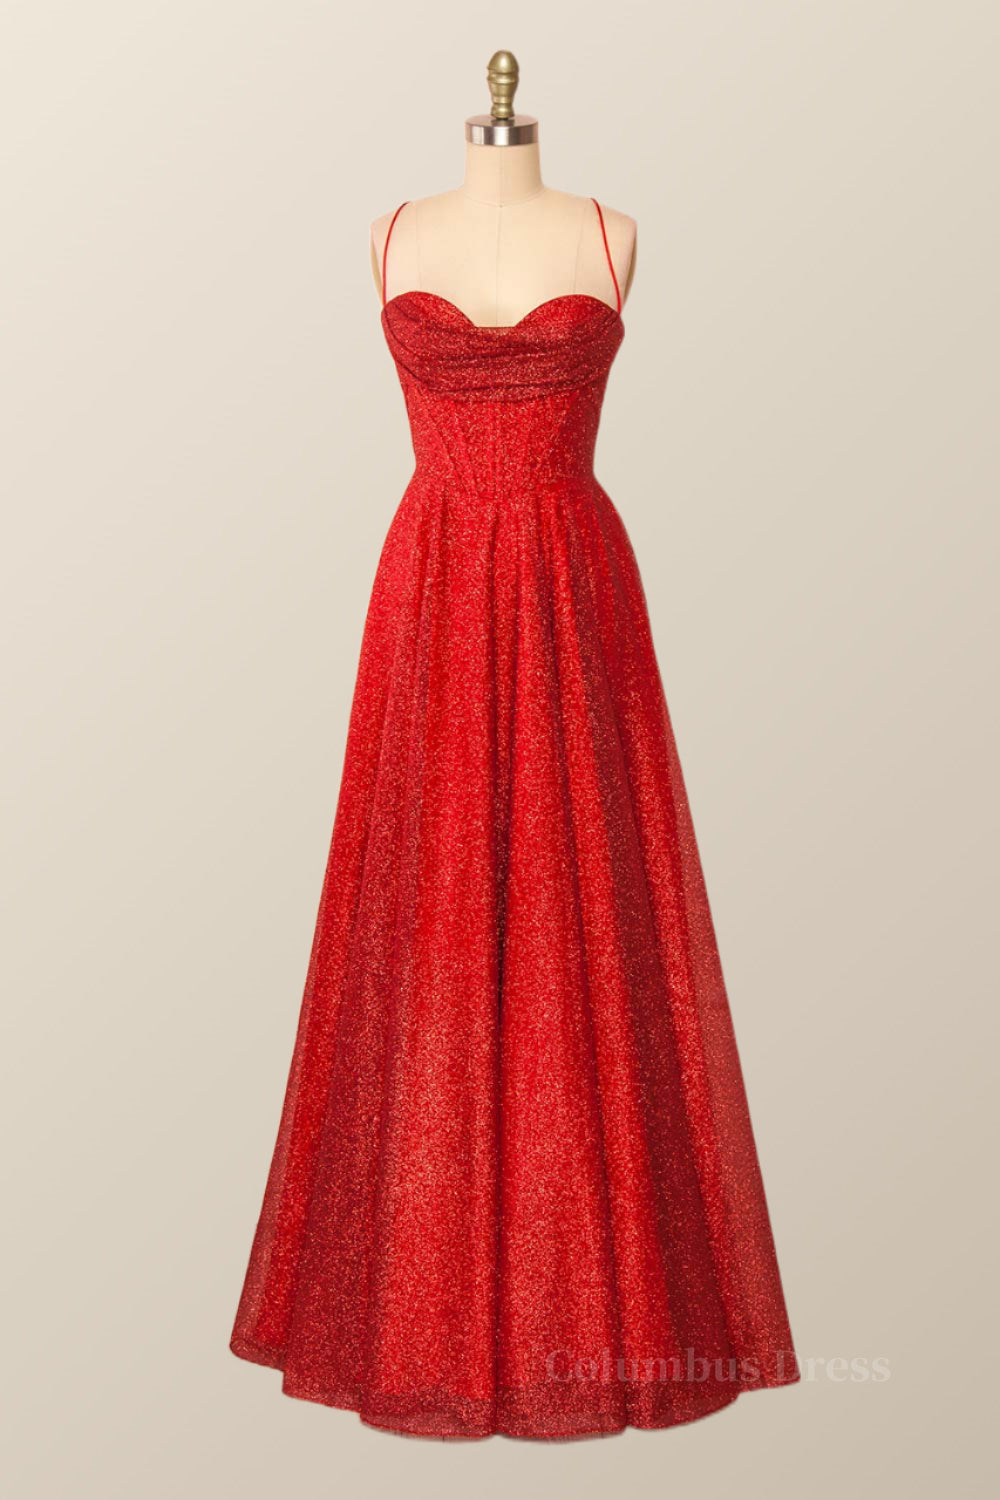 Party Fitness, Cowl Neck Red A-line Long Formal Dress